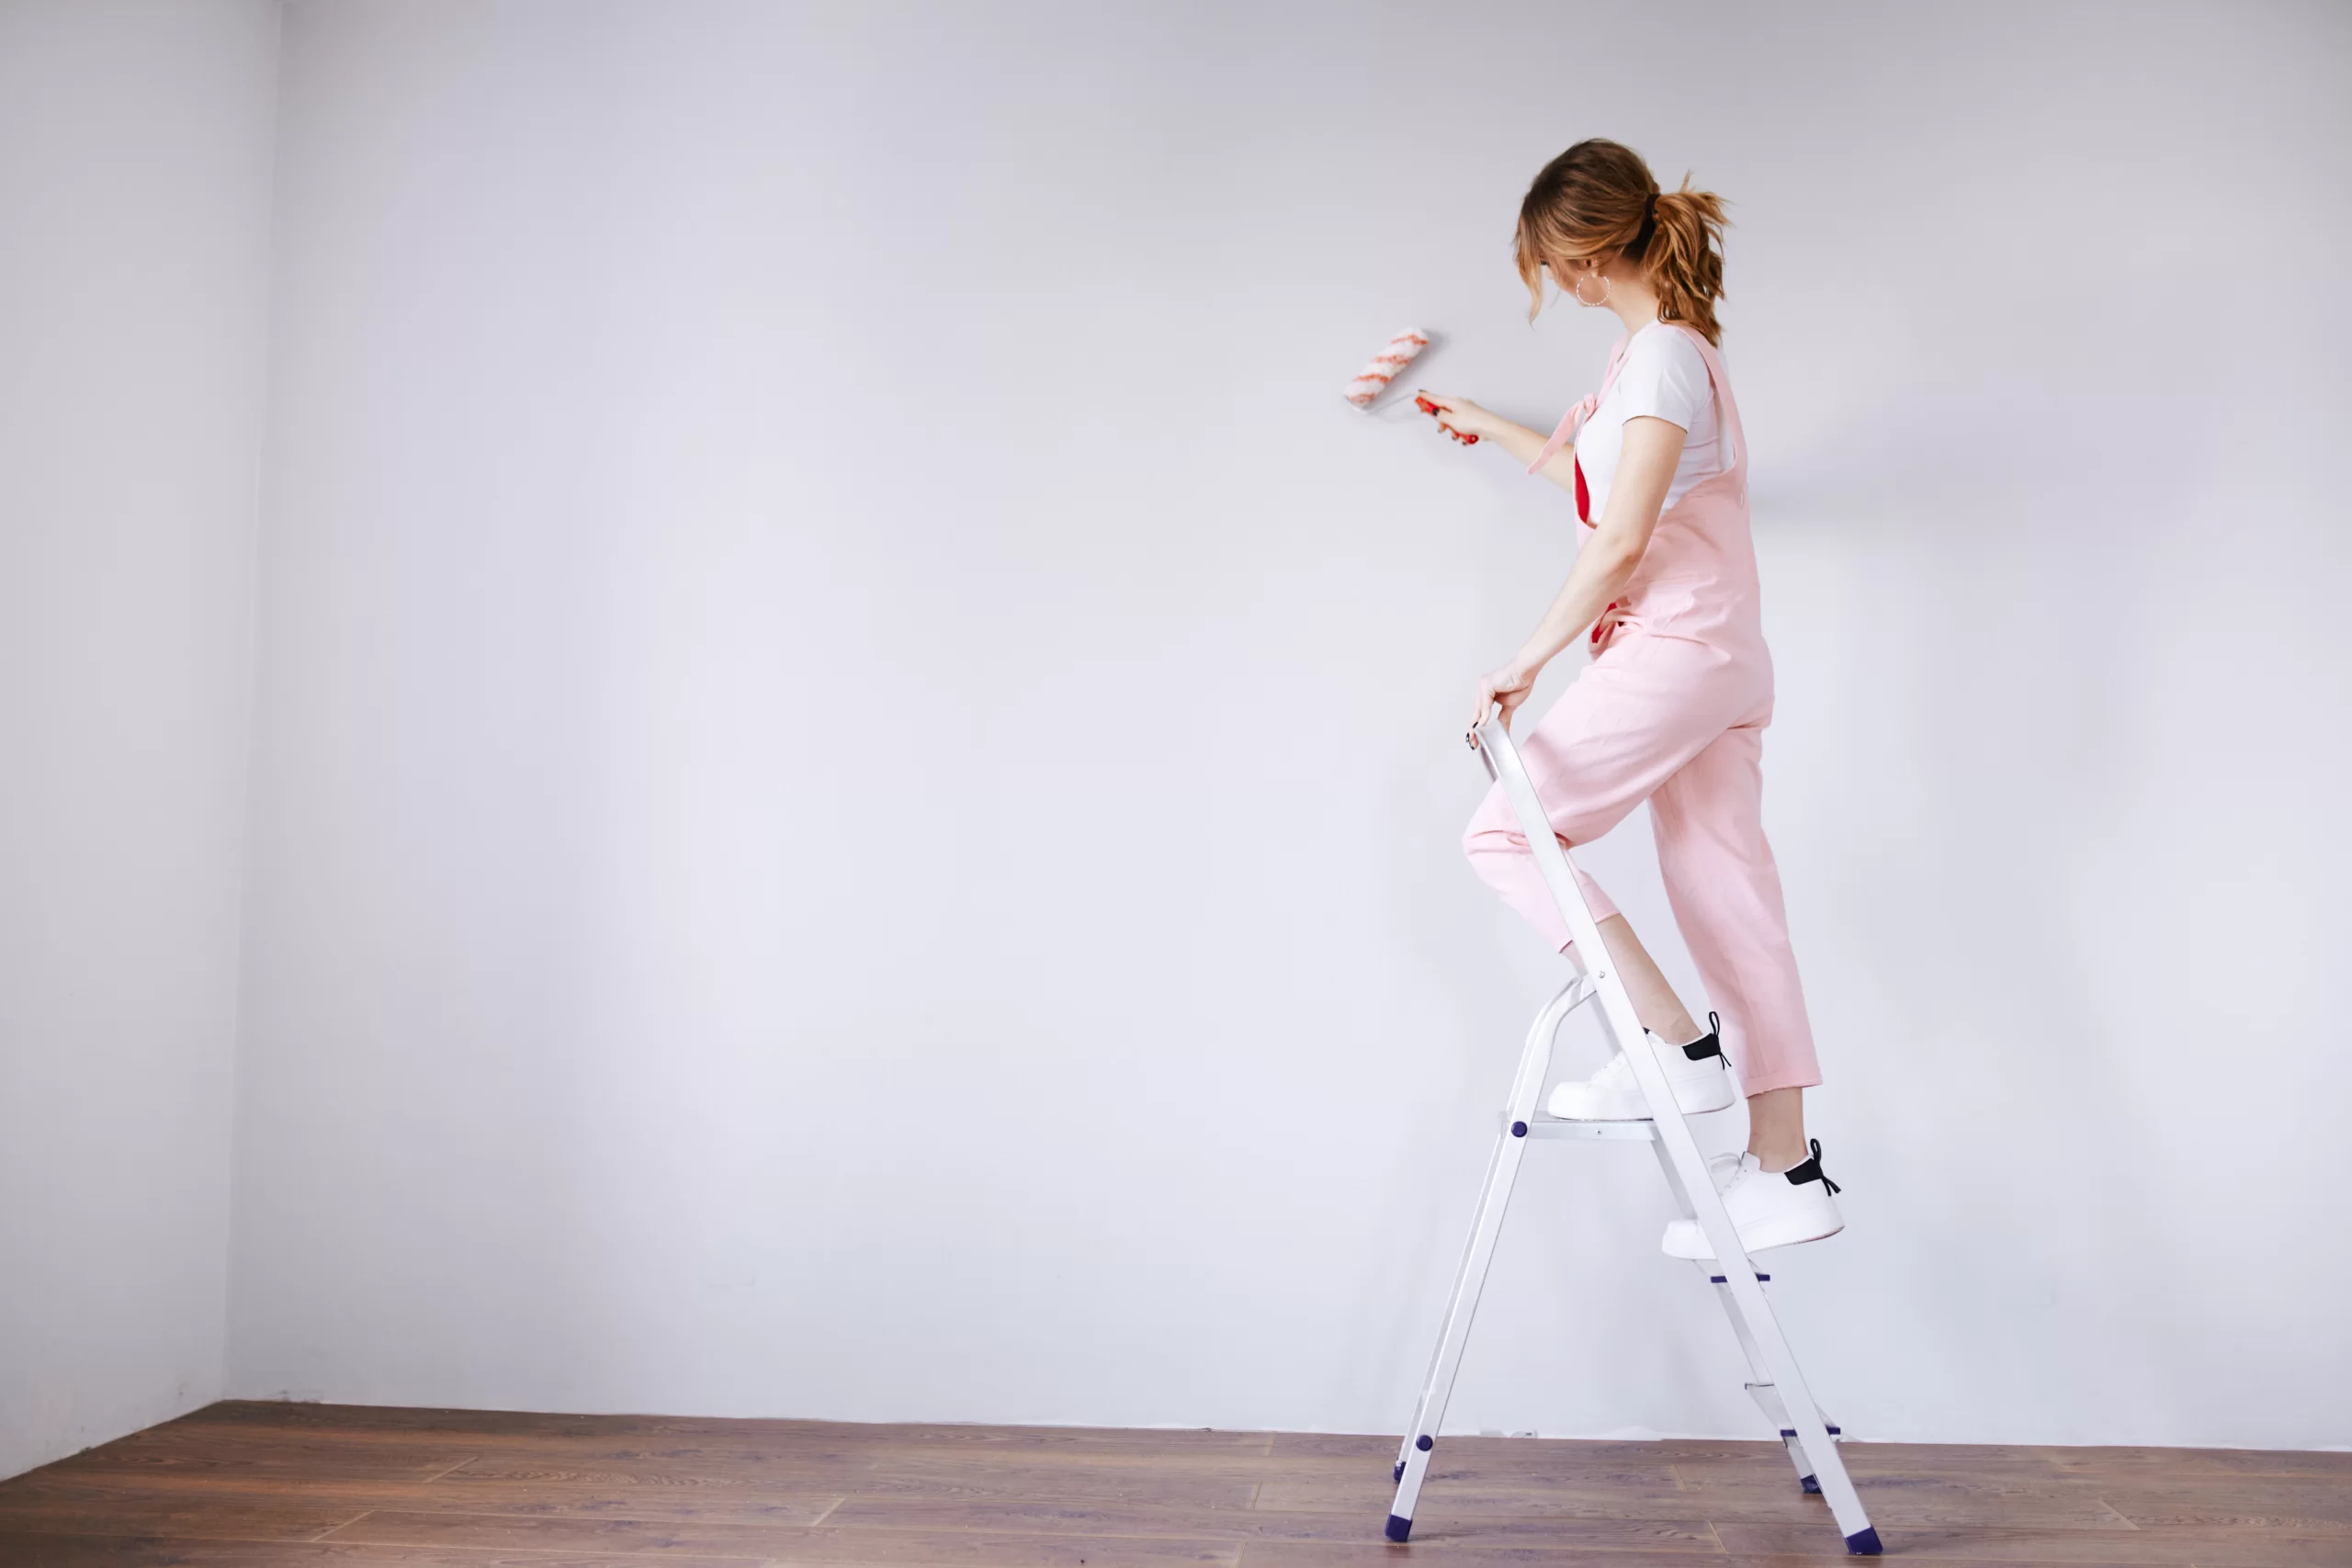 A woman in a pink jumpsuit is painting a wall reno r3s2j35 scaled. Jpg